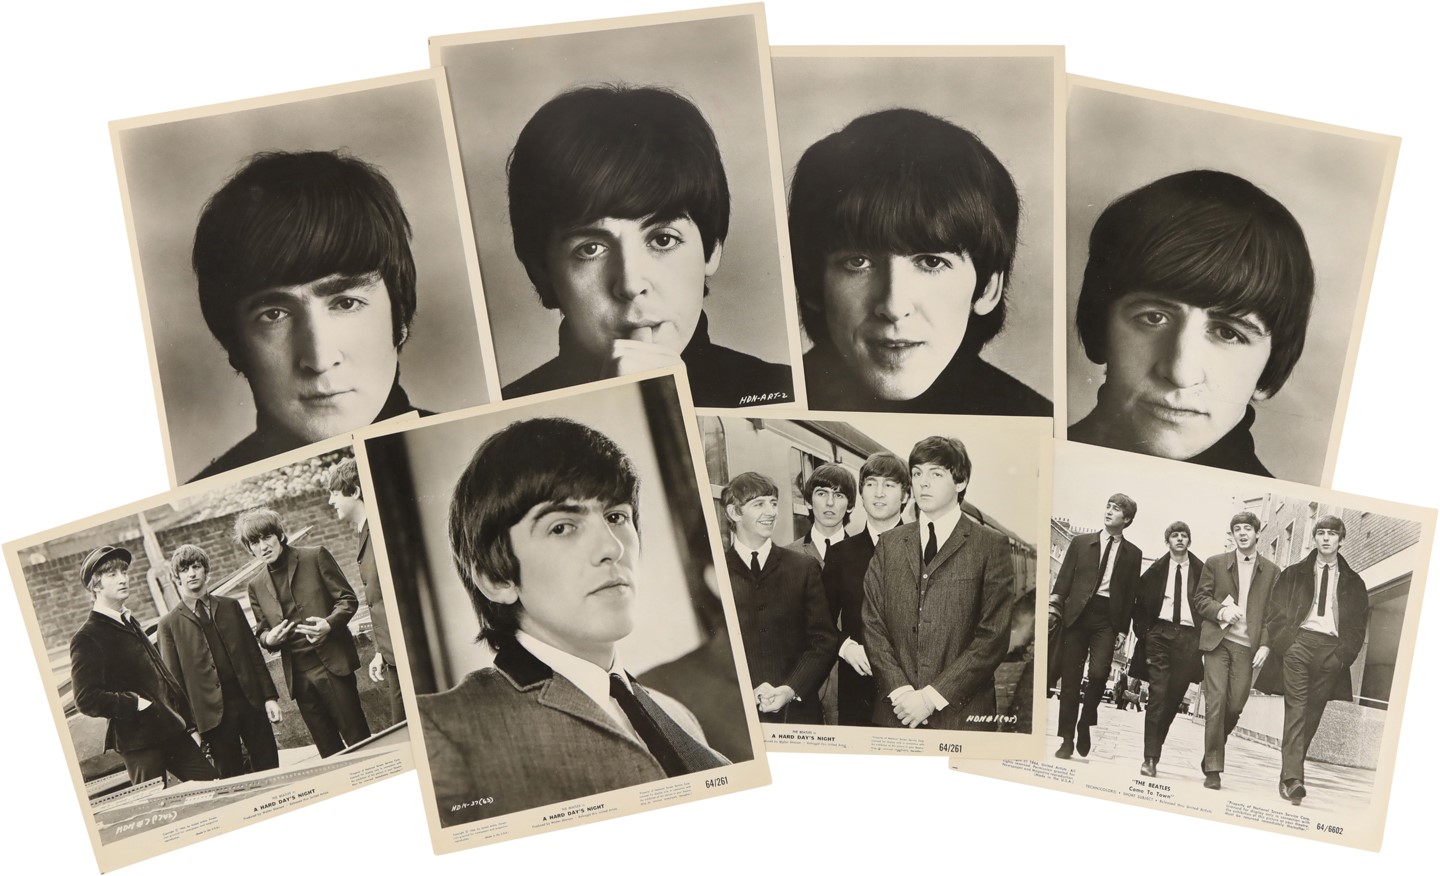 - The Beatles "A Hard Day's Night" Photographs (8)